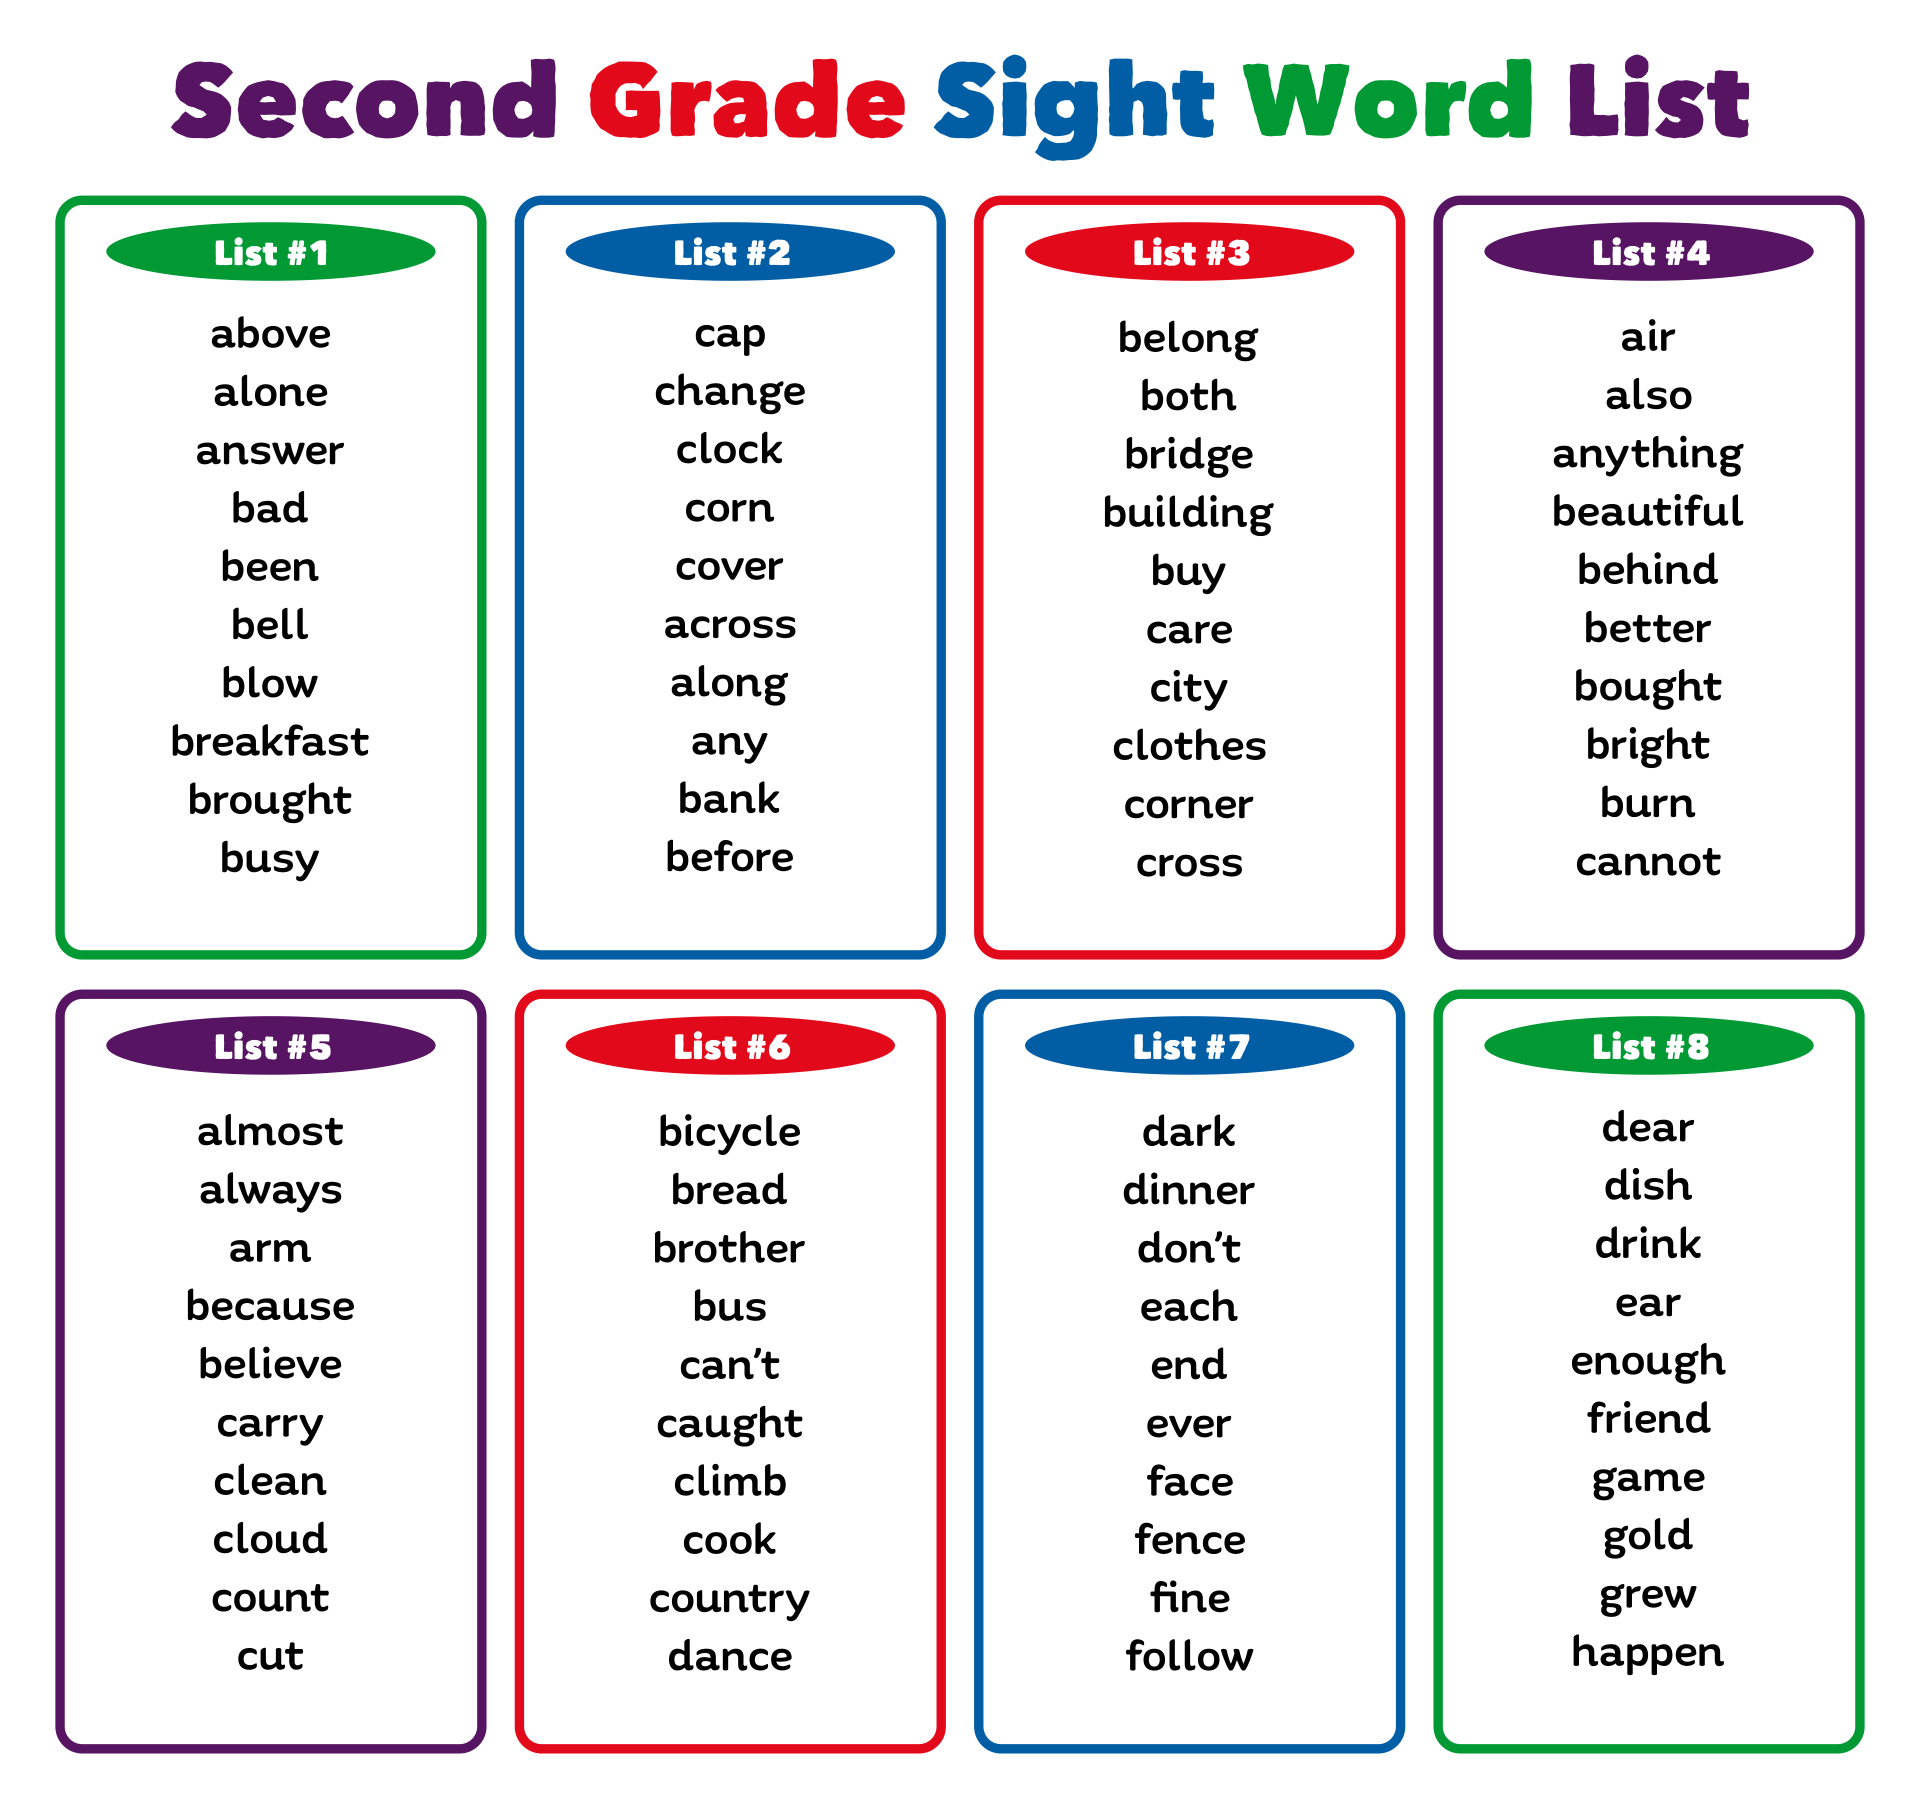 6-best-images-of-second-grade-sight-words-list-printable-2nd-grade